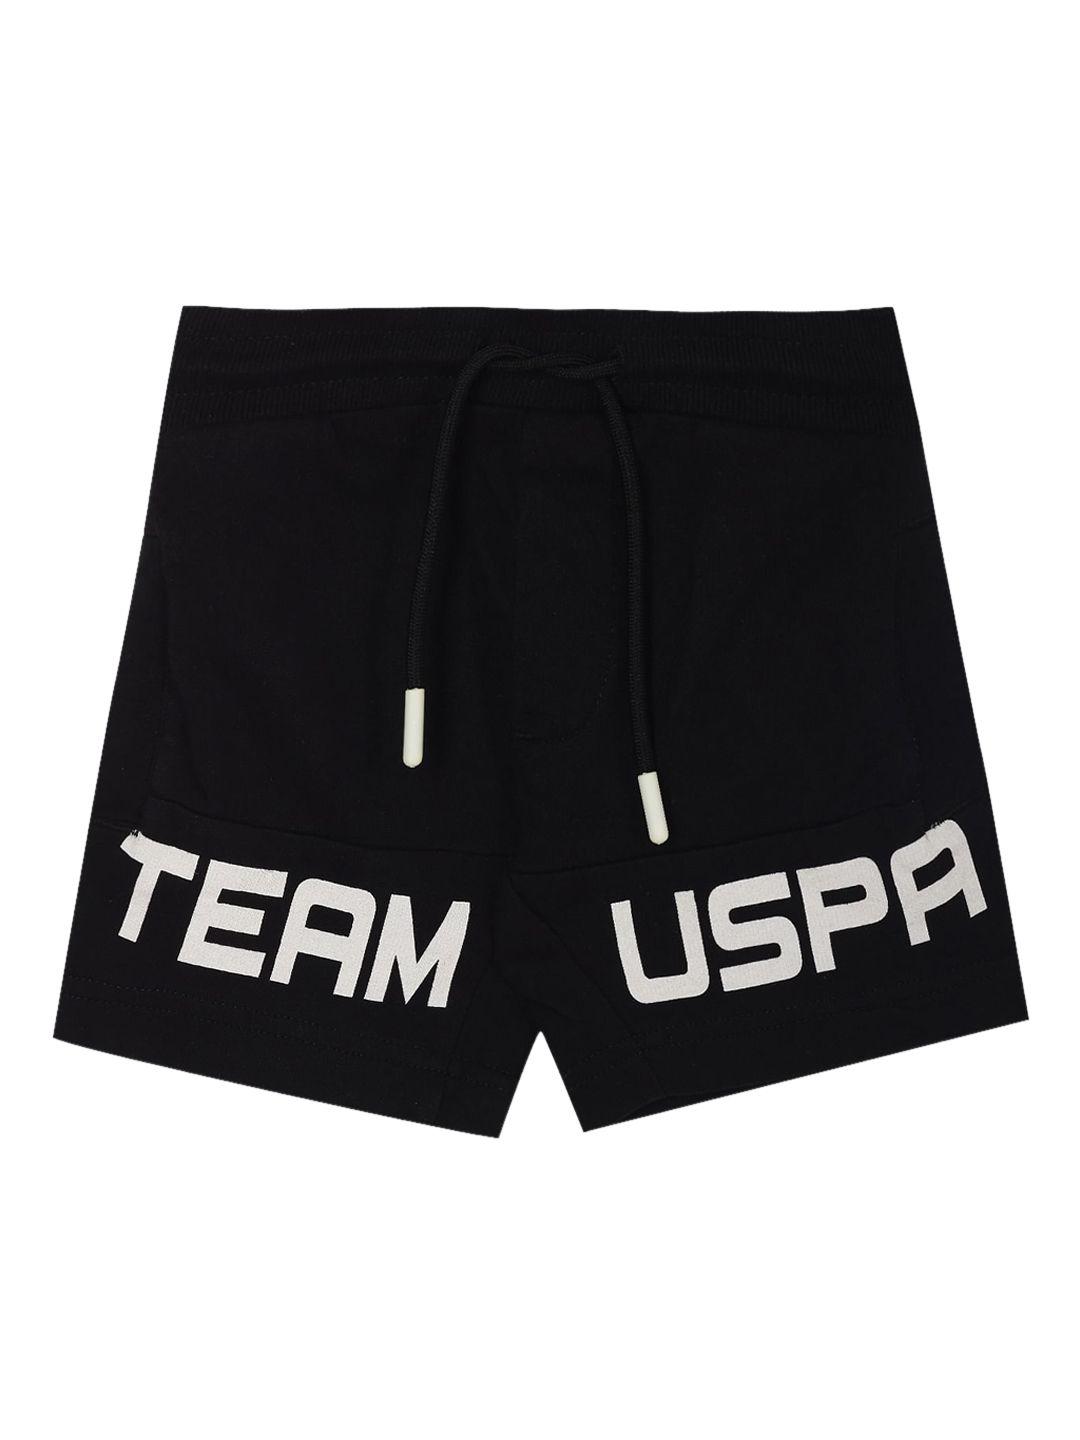 u.s. polo assn. kids boys typography printed cotton mid-rise regular fit shorts